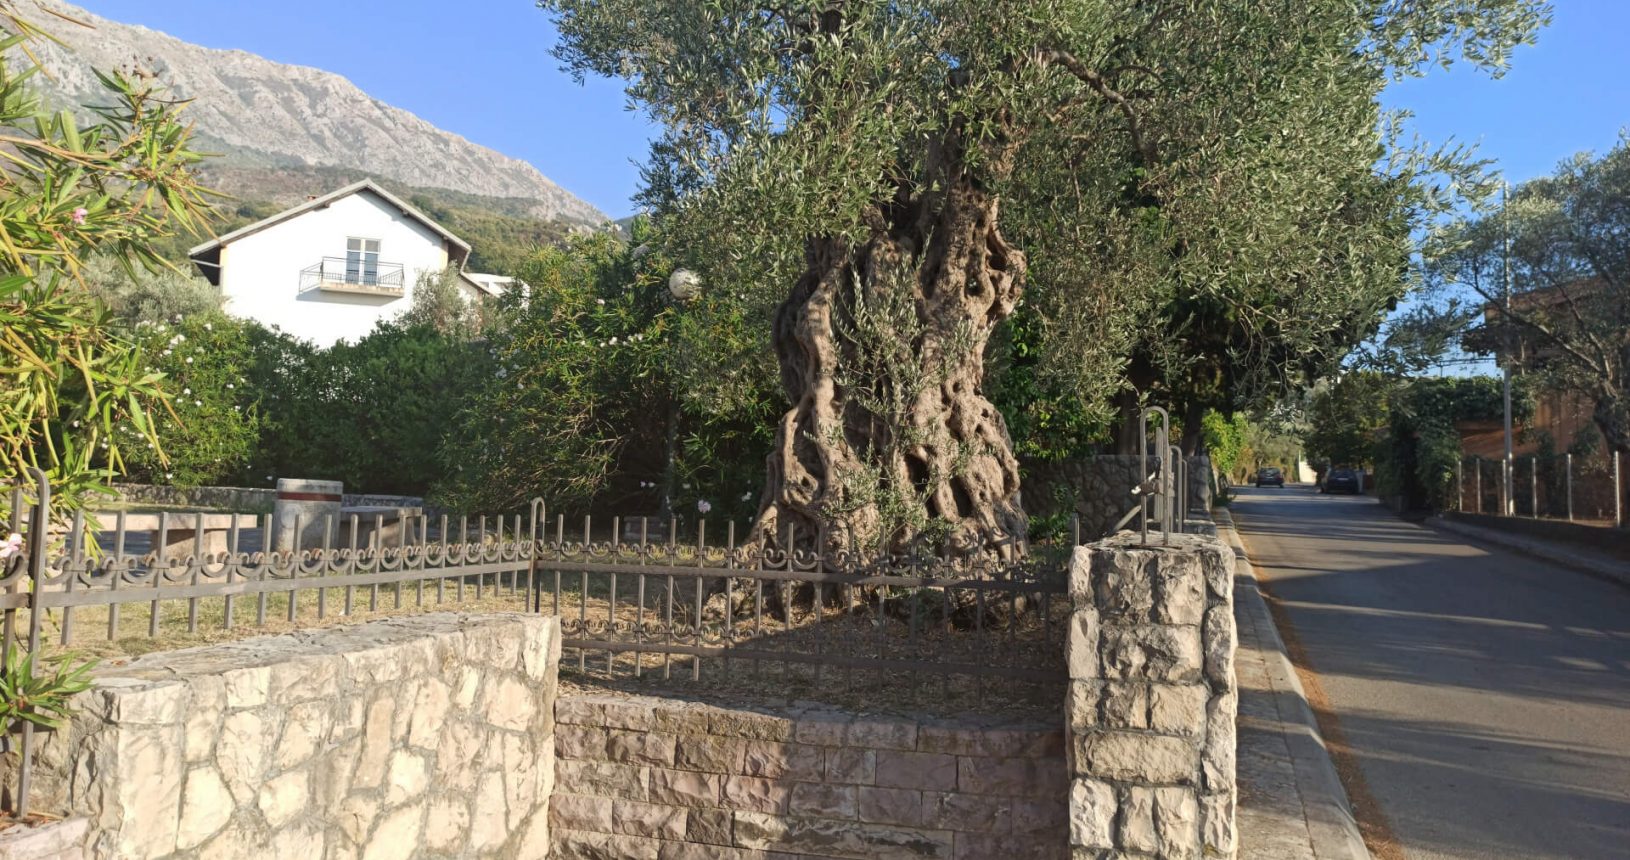 Other olive trees near Old Olive Tree